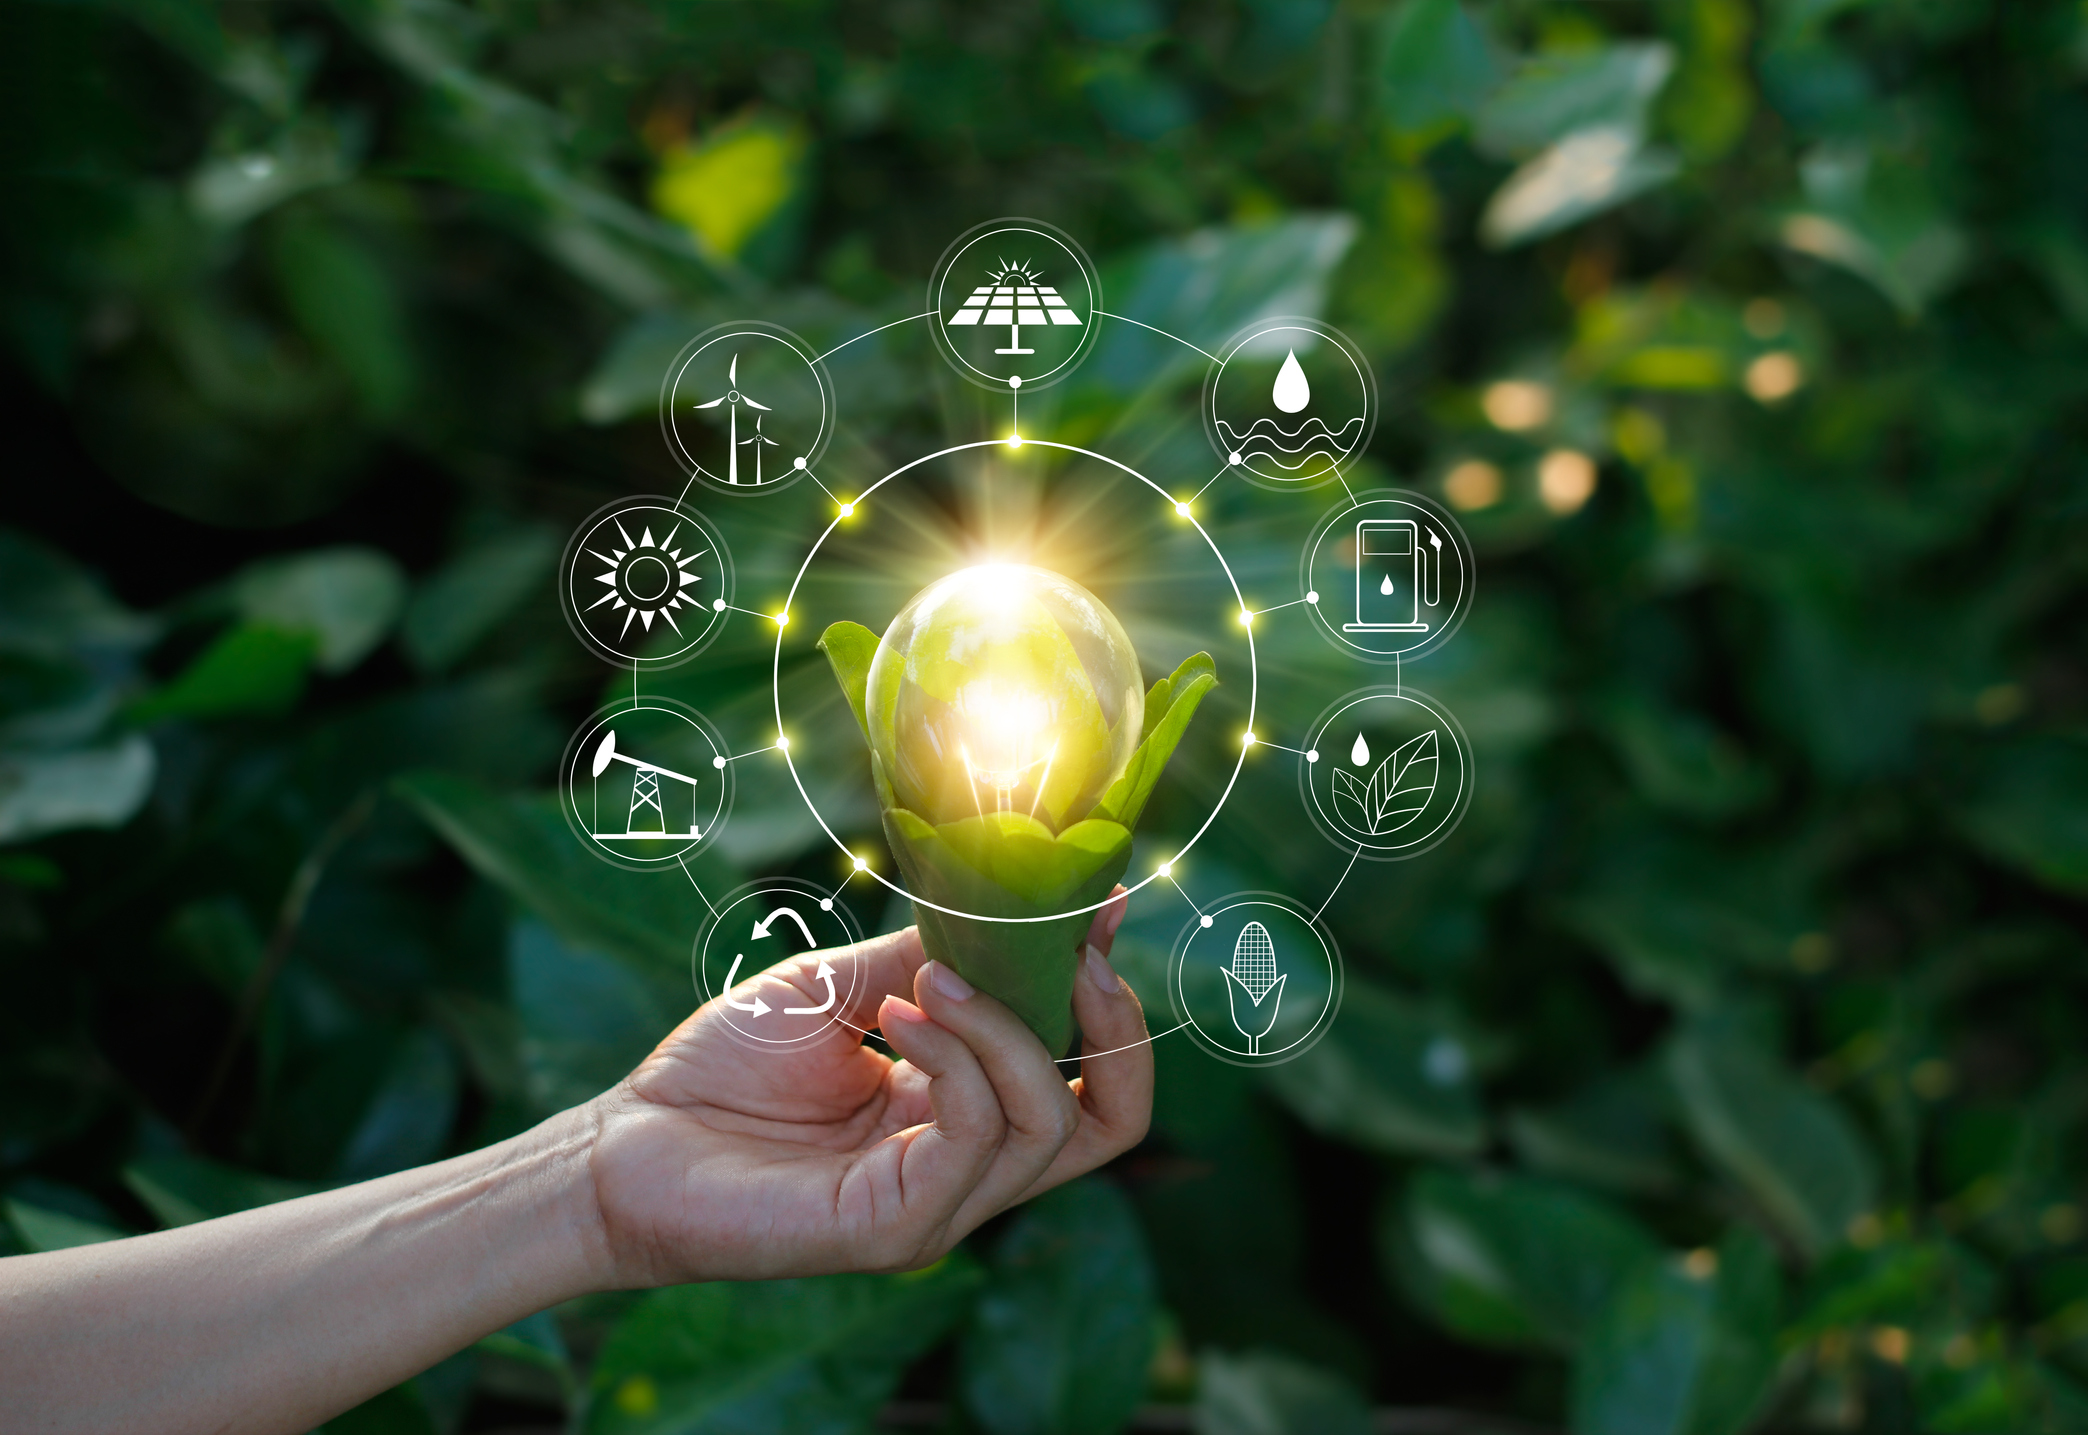 Ecology concept. Hand holding light bulb against nature on green leaf with icons energy sources for renewable, sustainable development, save energy.